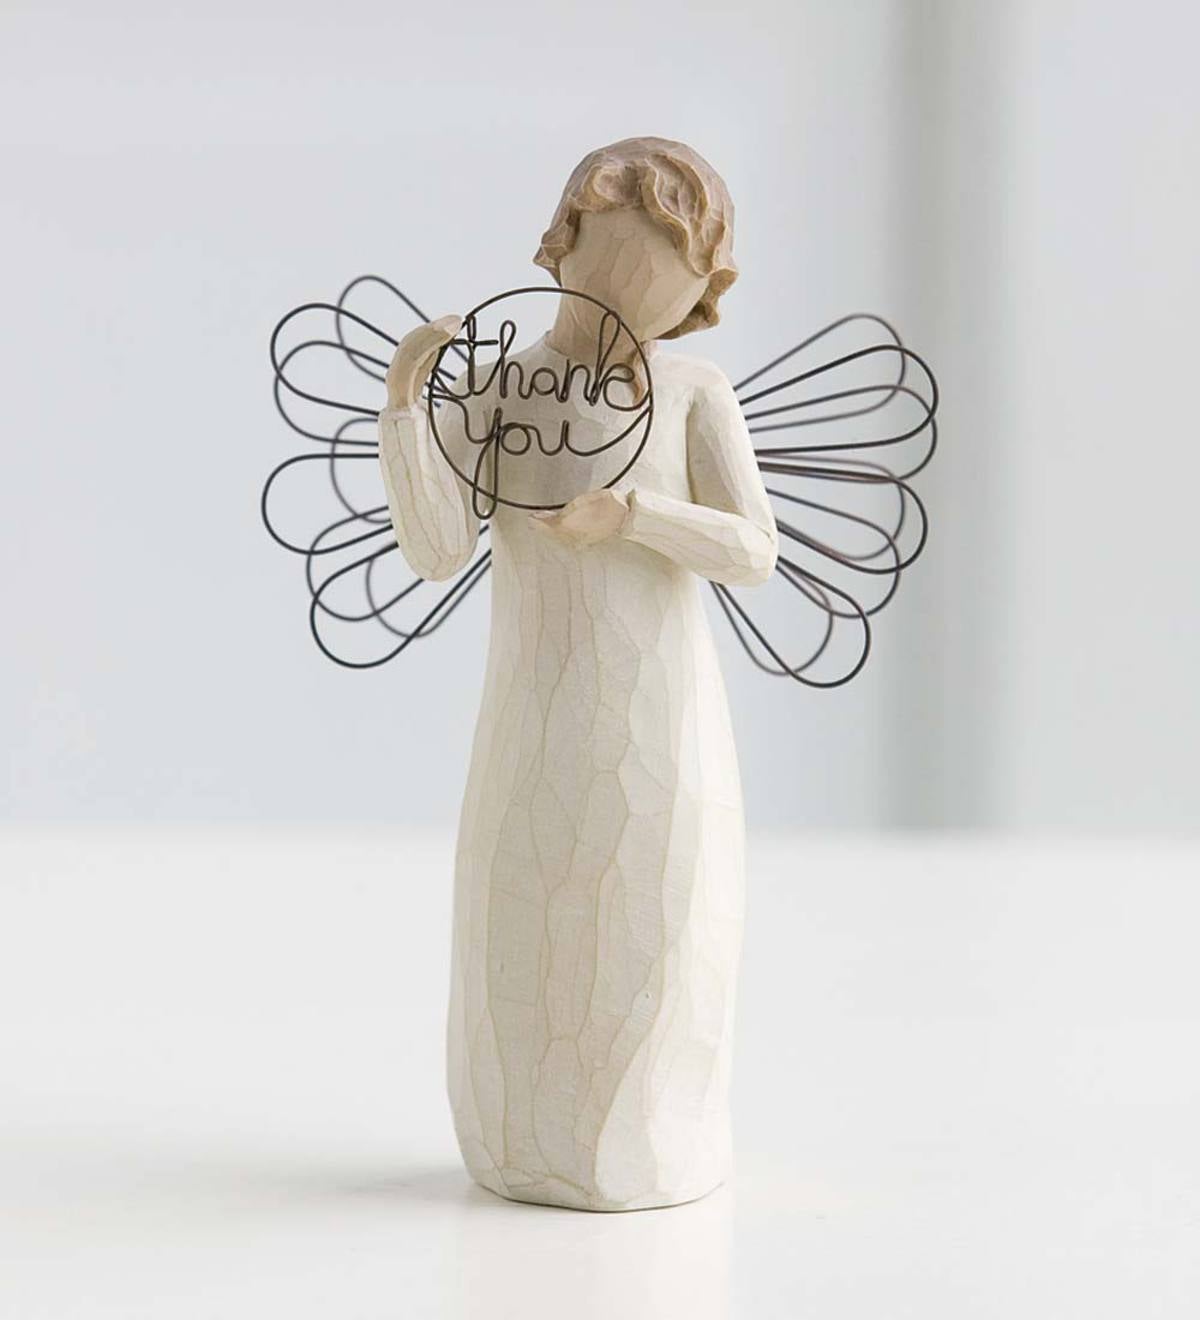 Willow Tree "Just For You" Figurine"